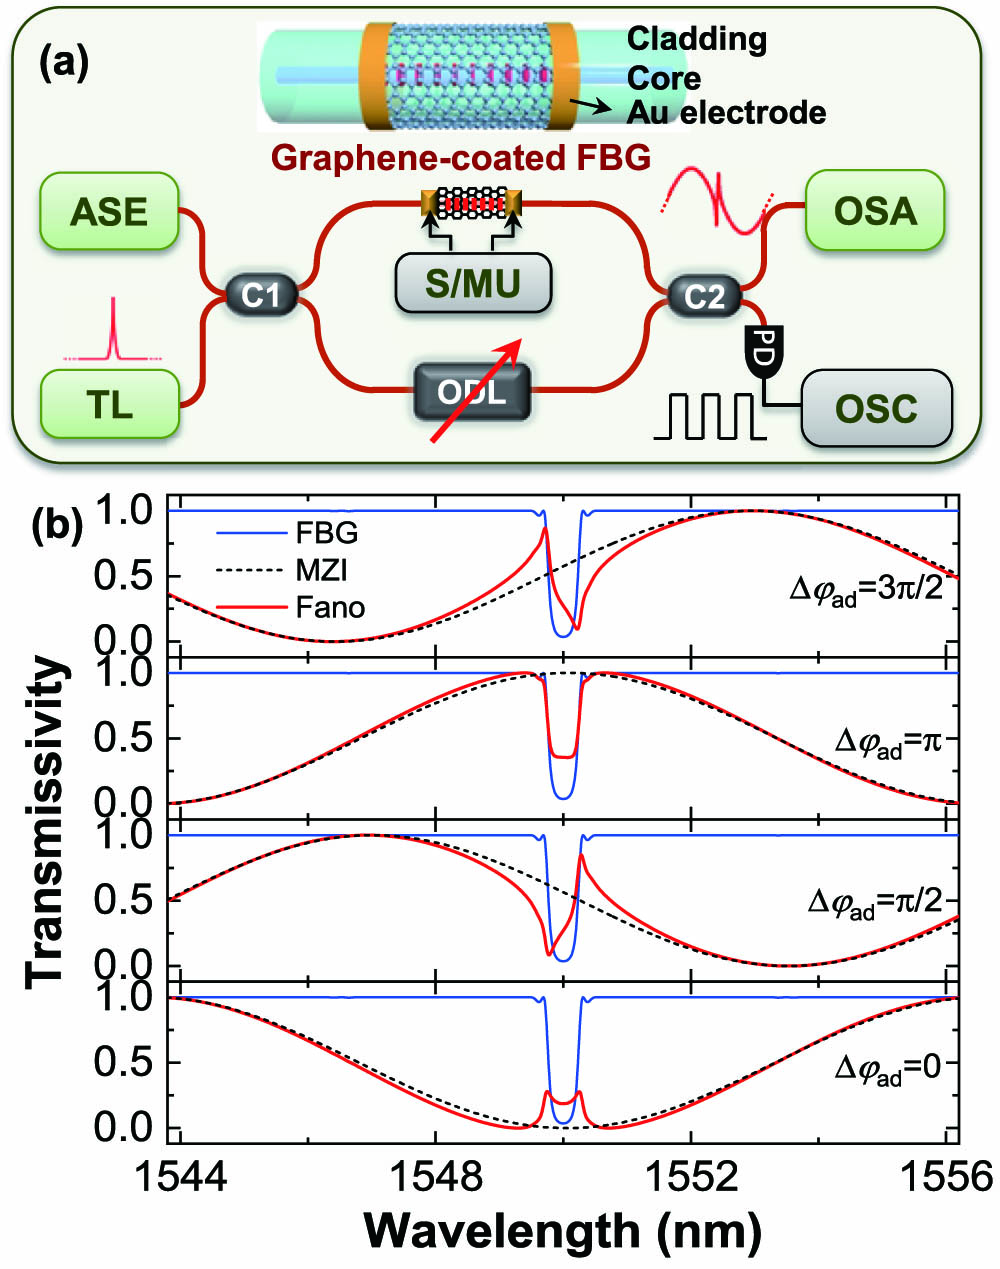 Schematical demonstration of the generation and tuning system of Fano-like resonance. (a) Configuration of an FBG in one arm of an MZI. The inset shows the model of graphene-coated FBG. (b) Theoretical calculations of the spectral line shapes at different phase shifts Δφad=0, π/2, π, 3π/2 (please see the detailed evolution in Visualization 1). ASE, amplified spontaneous emission; TL, tunable laser; C1/C2, coupler 1/2; FBG, fiber Bragg grating, S/MU, source/measure unit; ODL, optical delay line; PD, photodetector; OSA, optical spectrum analyzer; OSC, oscilloscope.